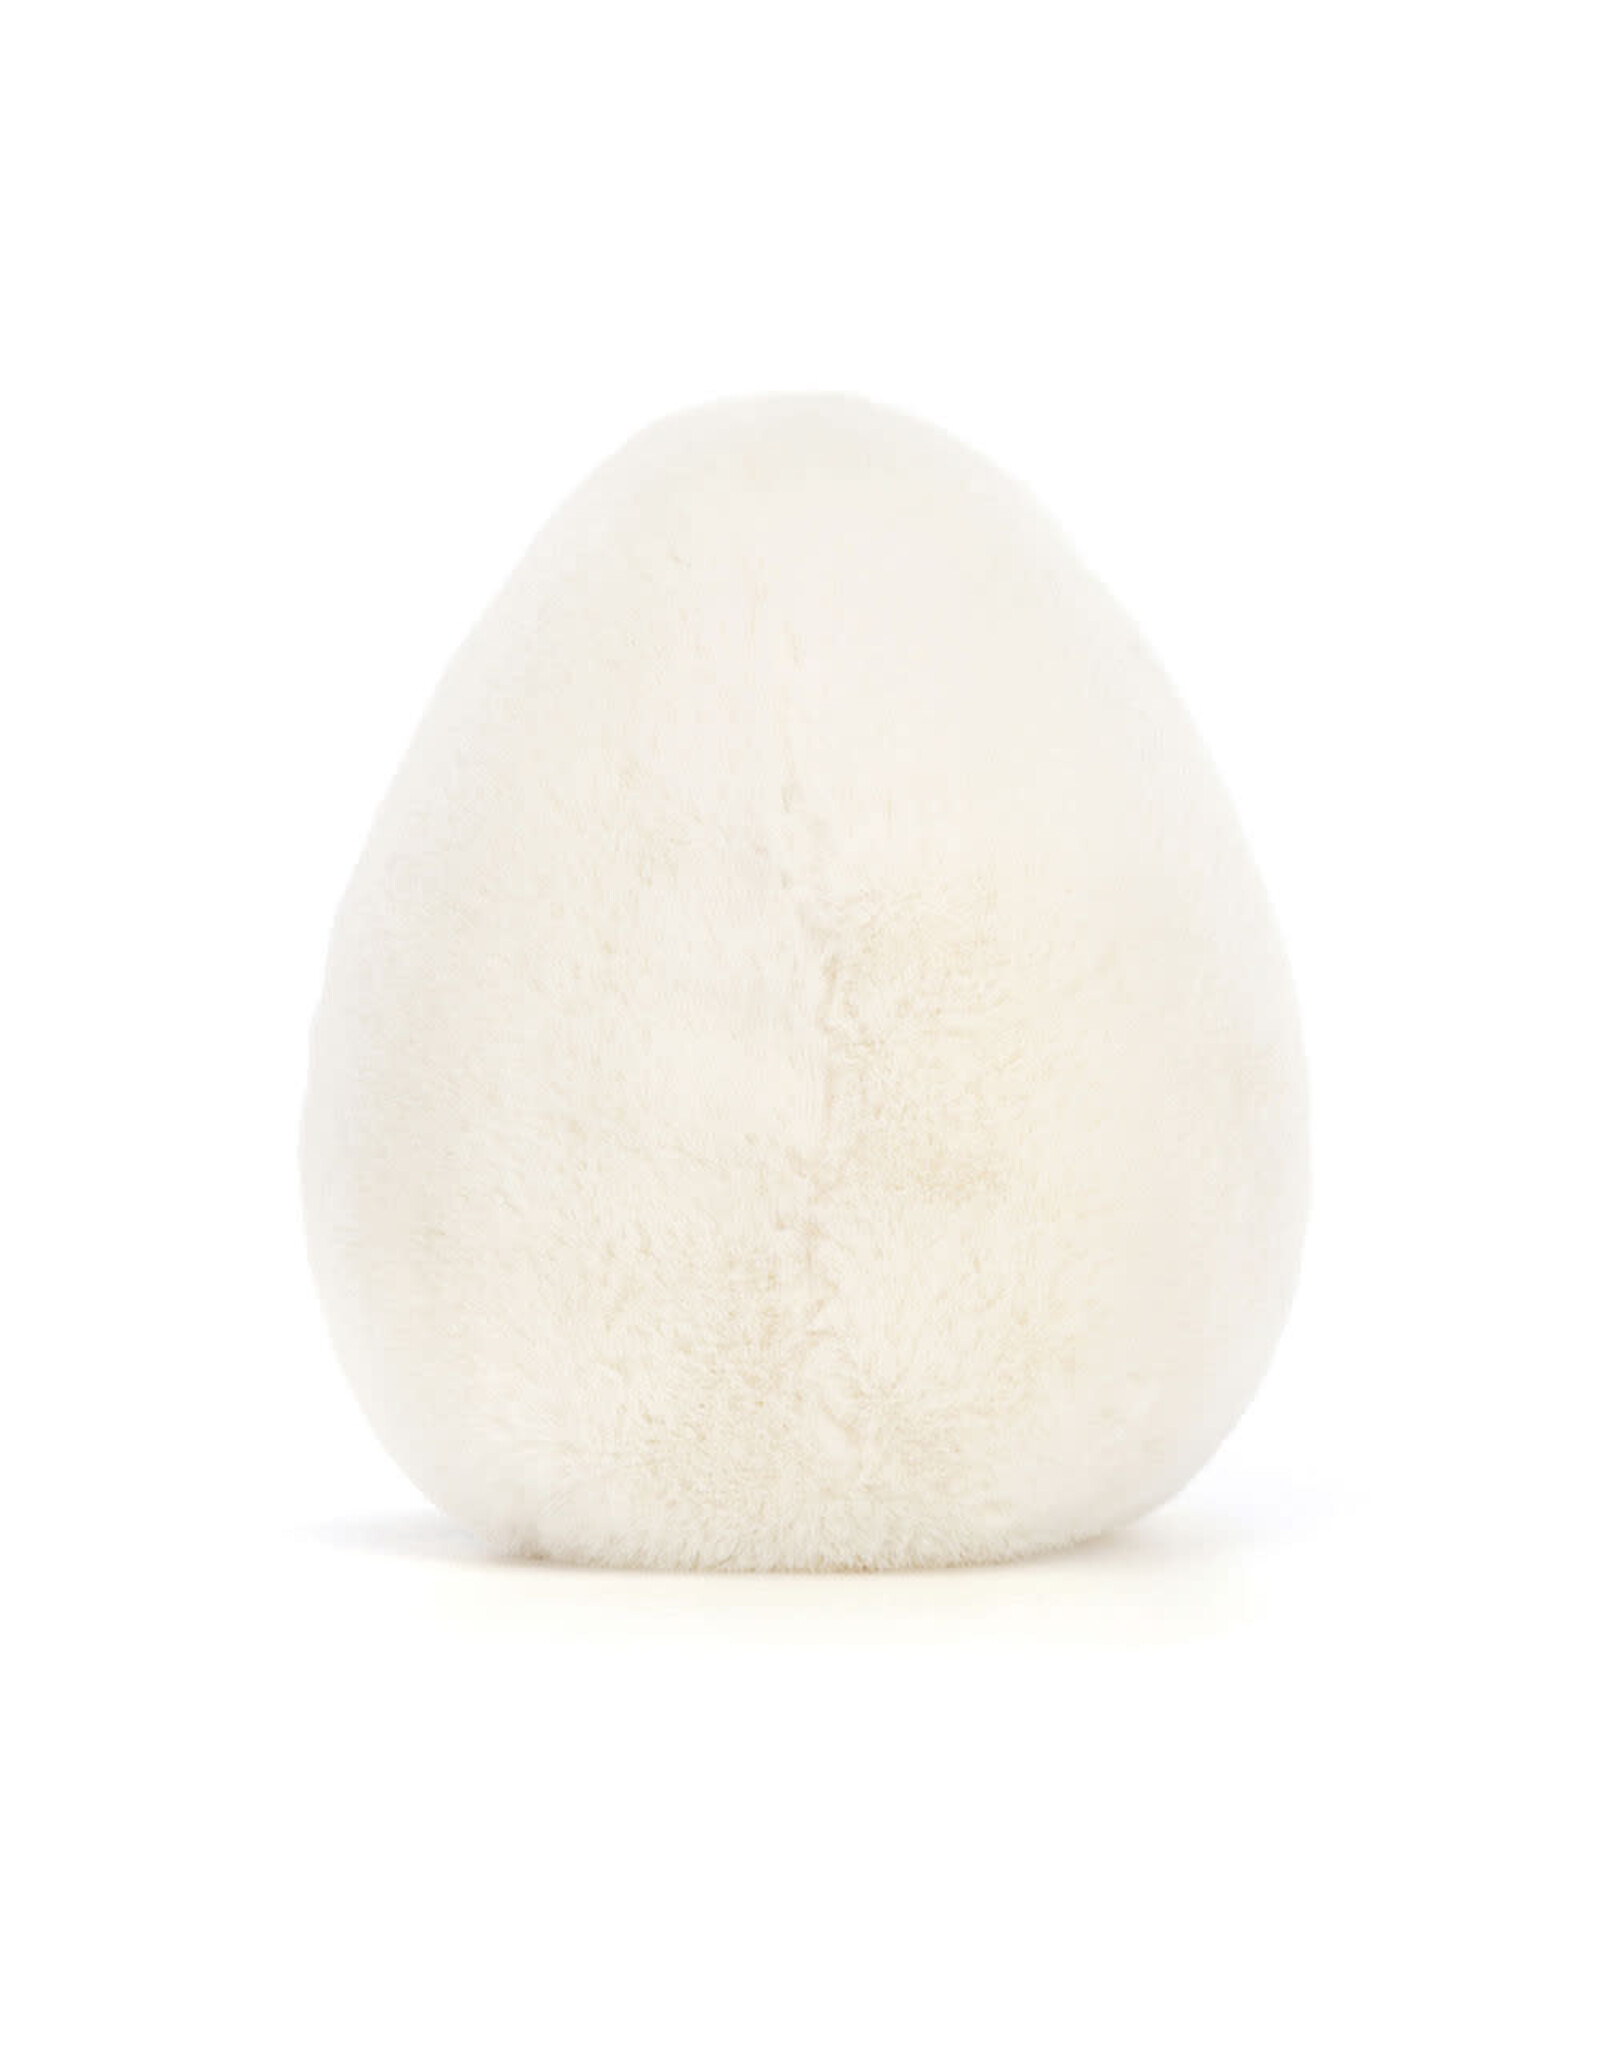 Jellycat Knuffel - Amuseable - Boiled Egg Chic